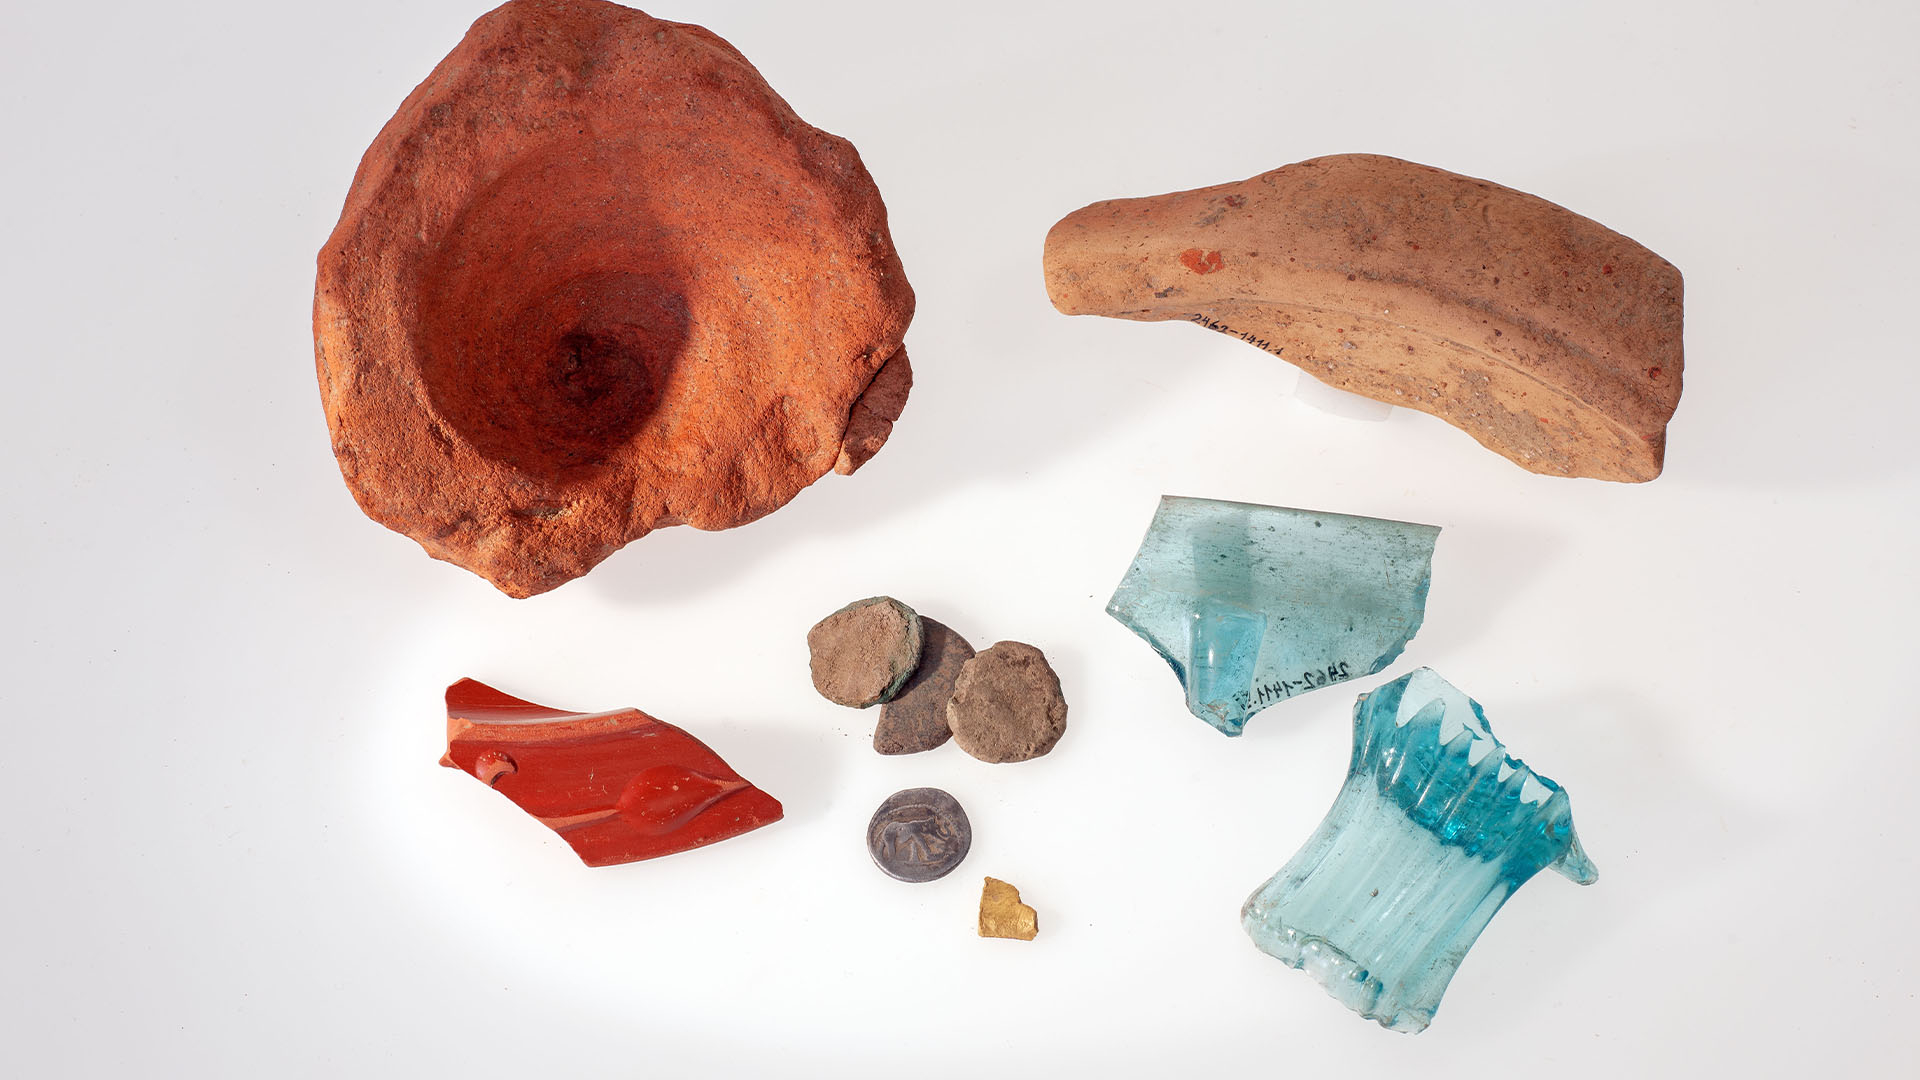 An amphora base, piece of a mortar, rim of a bowl, four coins, a gold object, pieces of a bottle and a blue glass bowl.